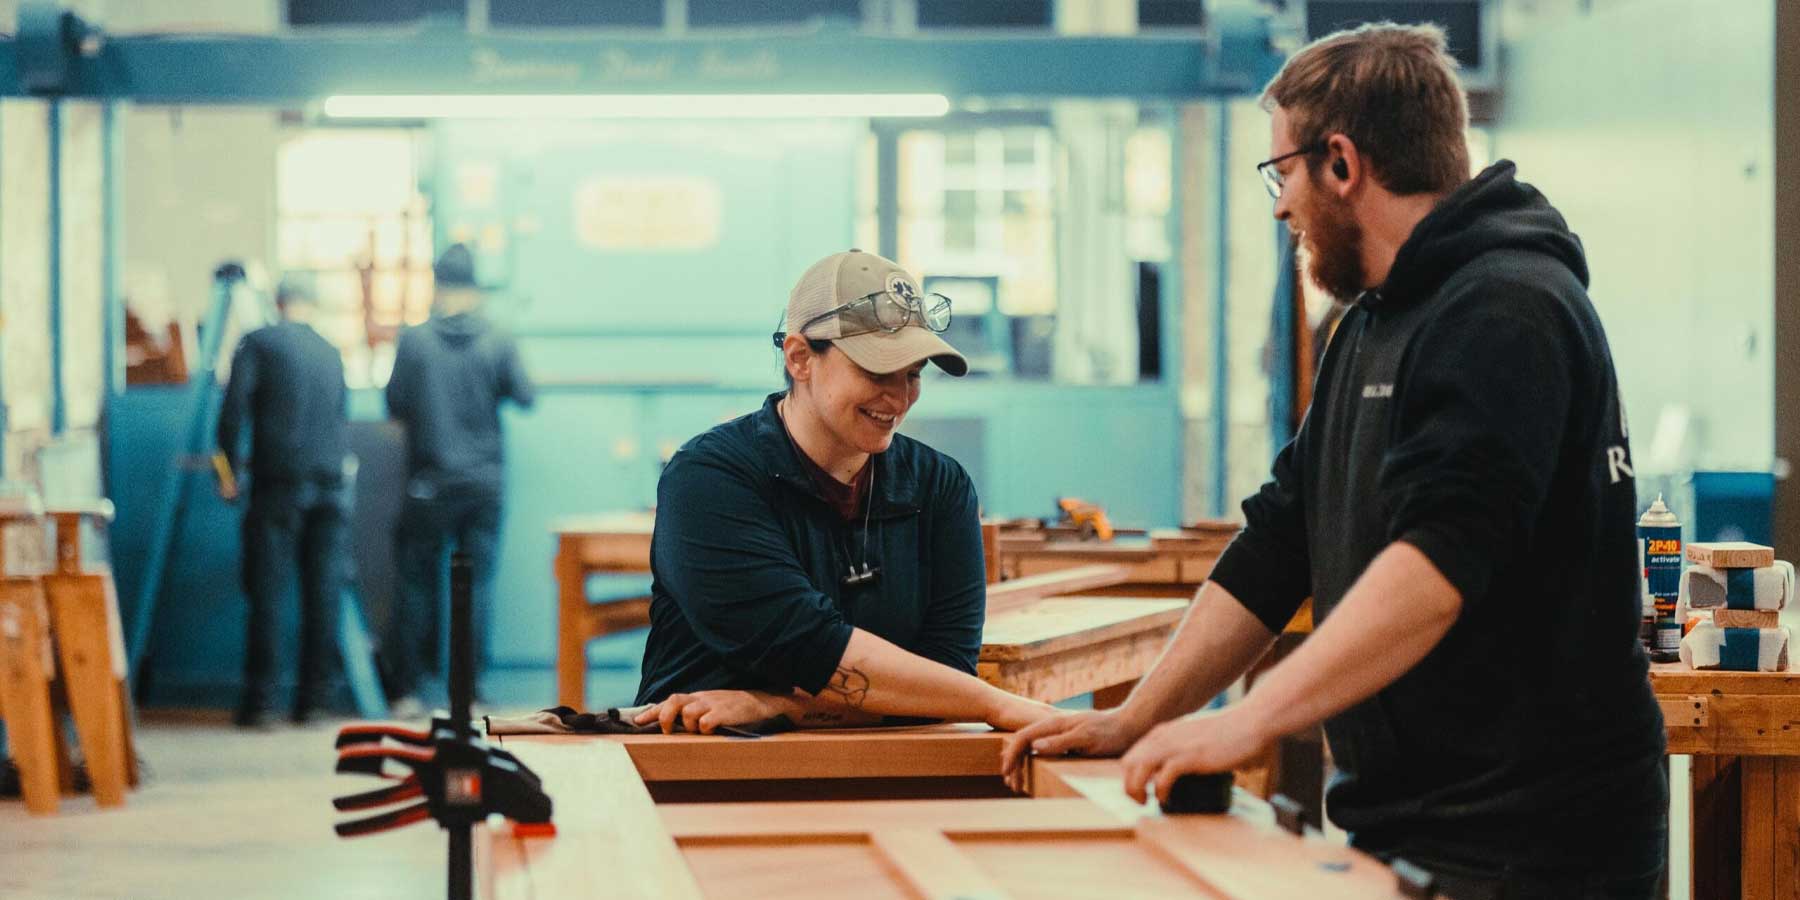 Craftsman and Craftswoman building a door and laughing 